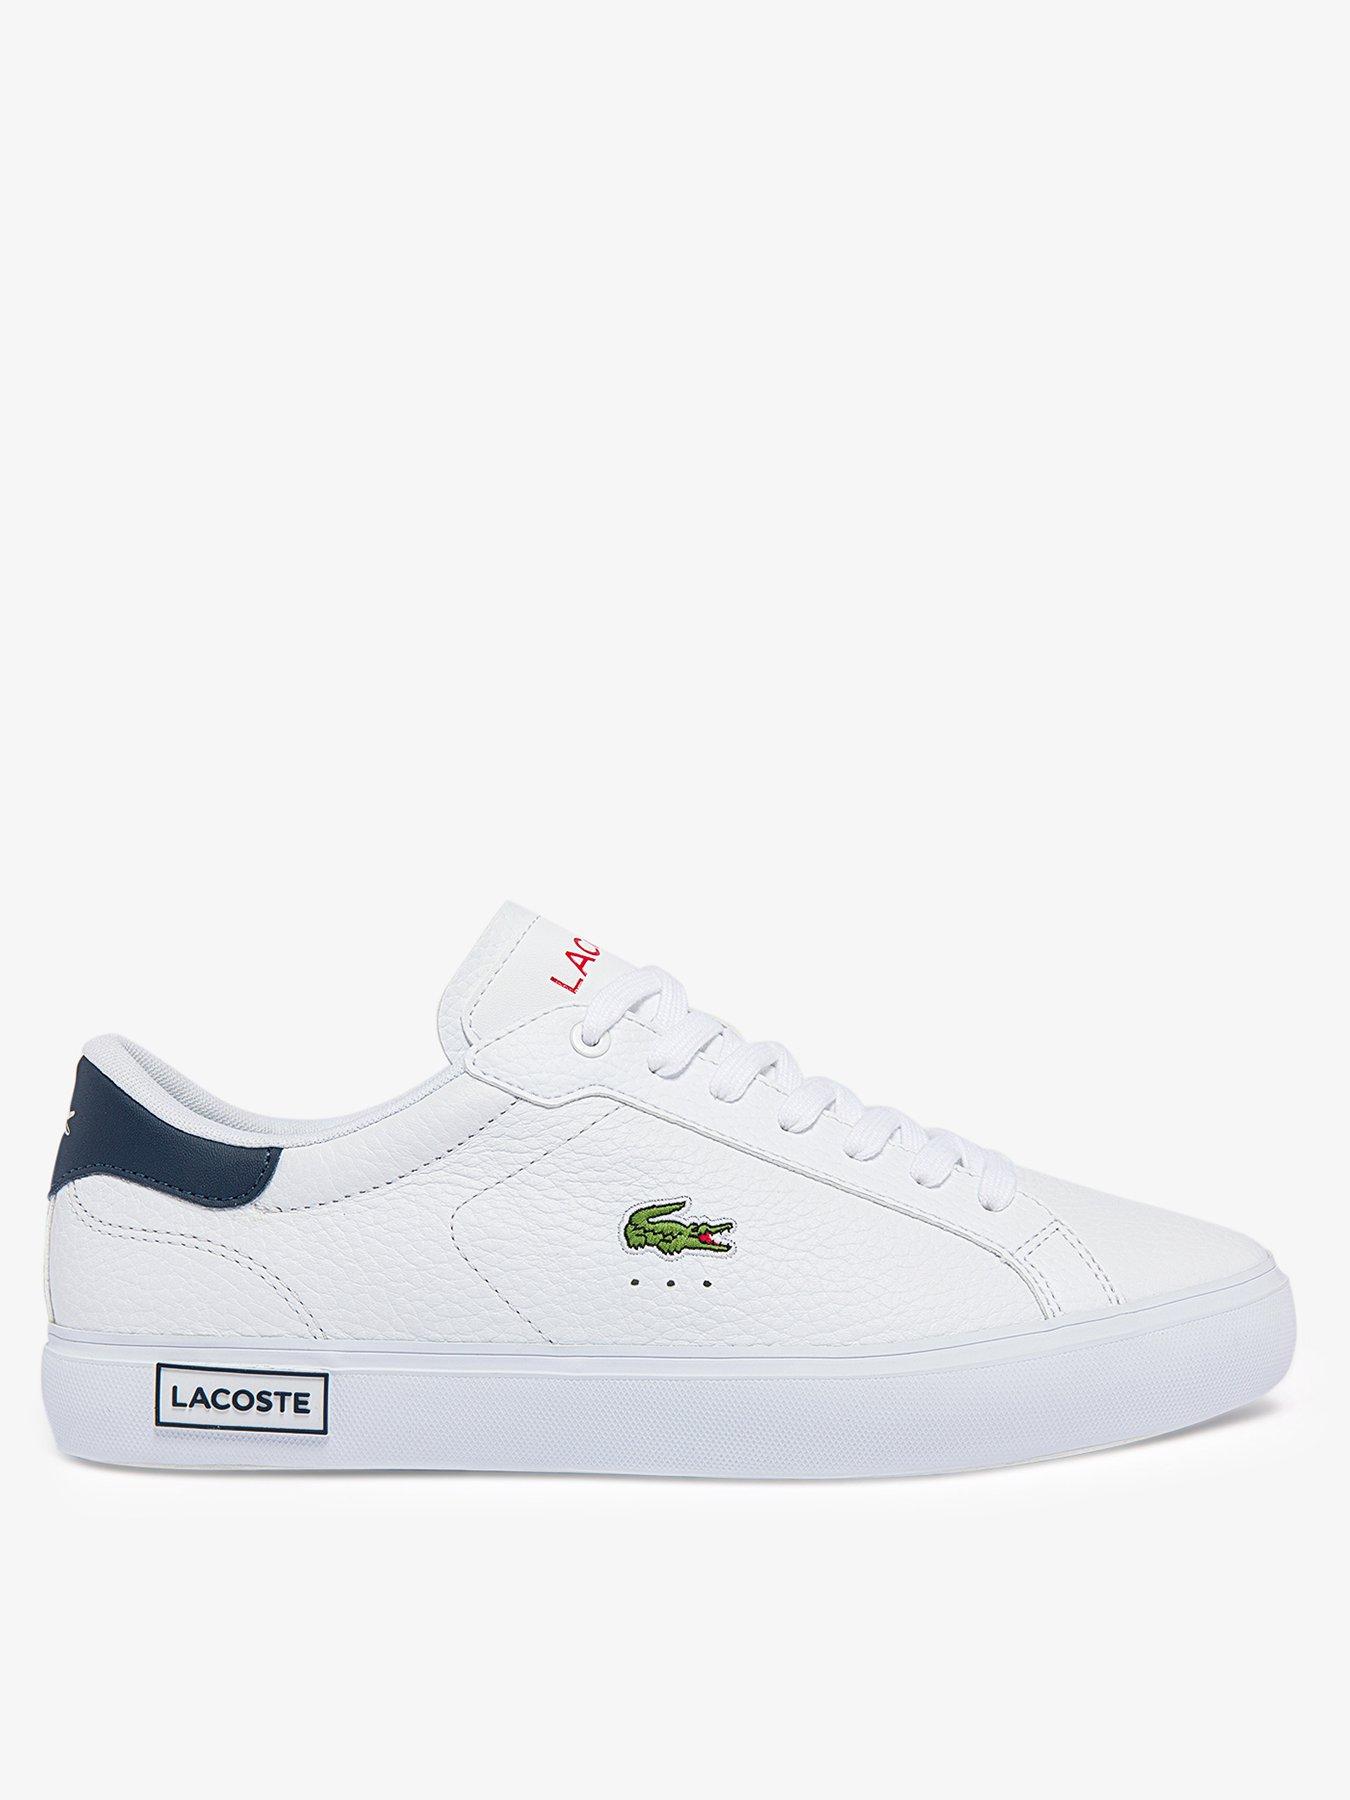 Lacoste Powercourt 0721 2 Sma Trainer | very.co.uk